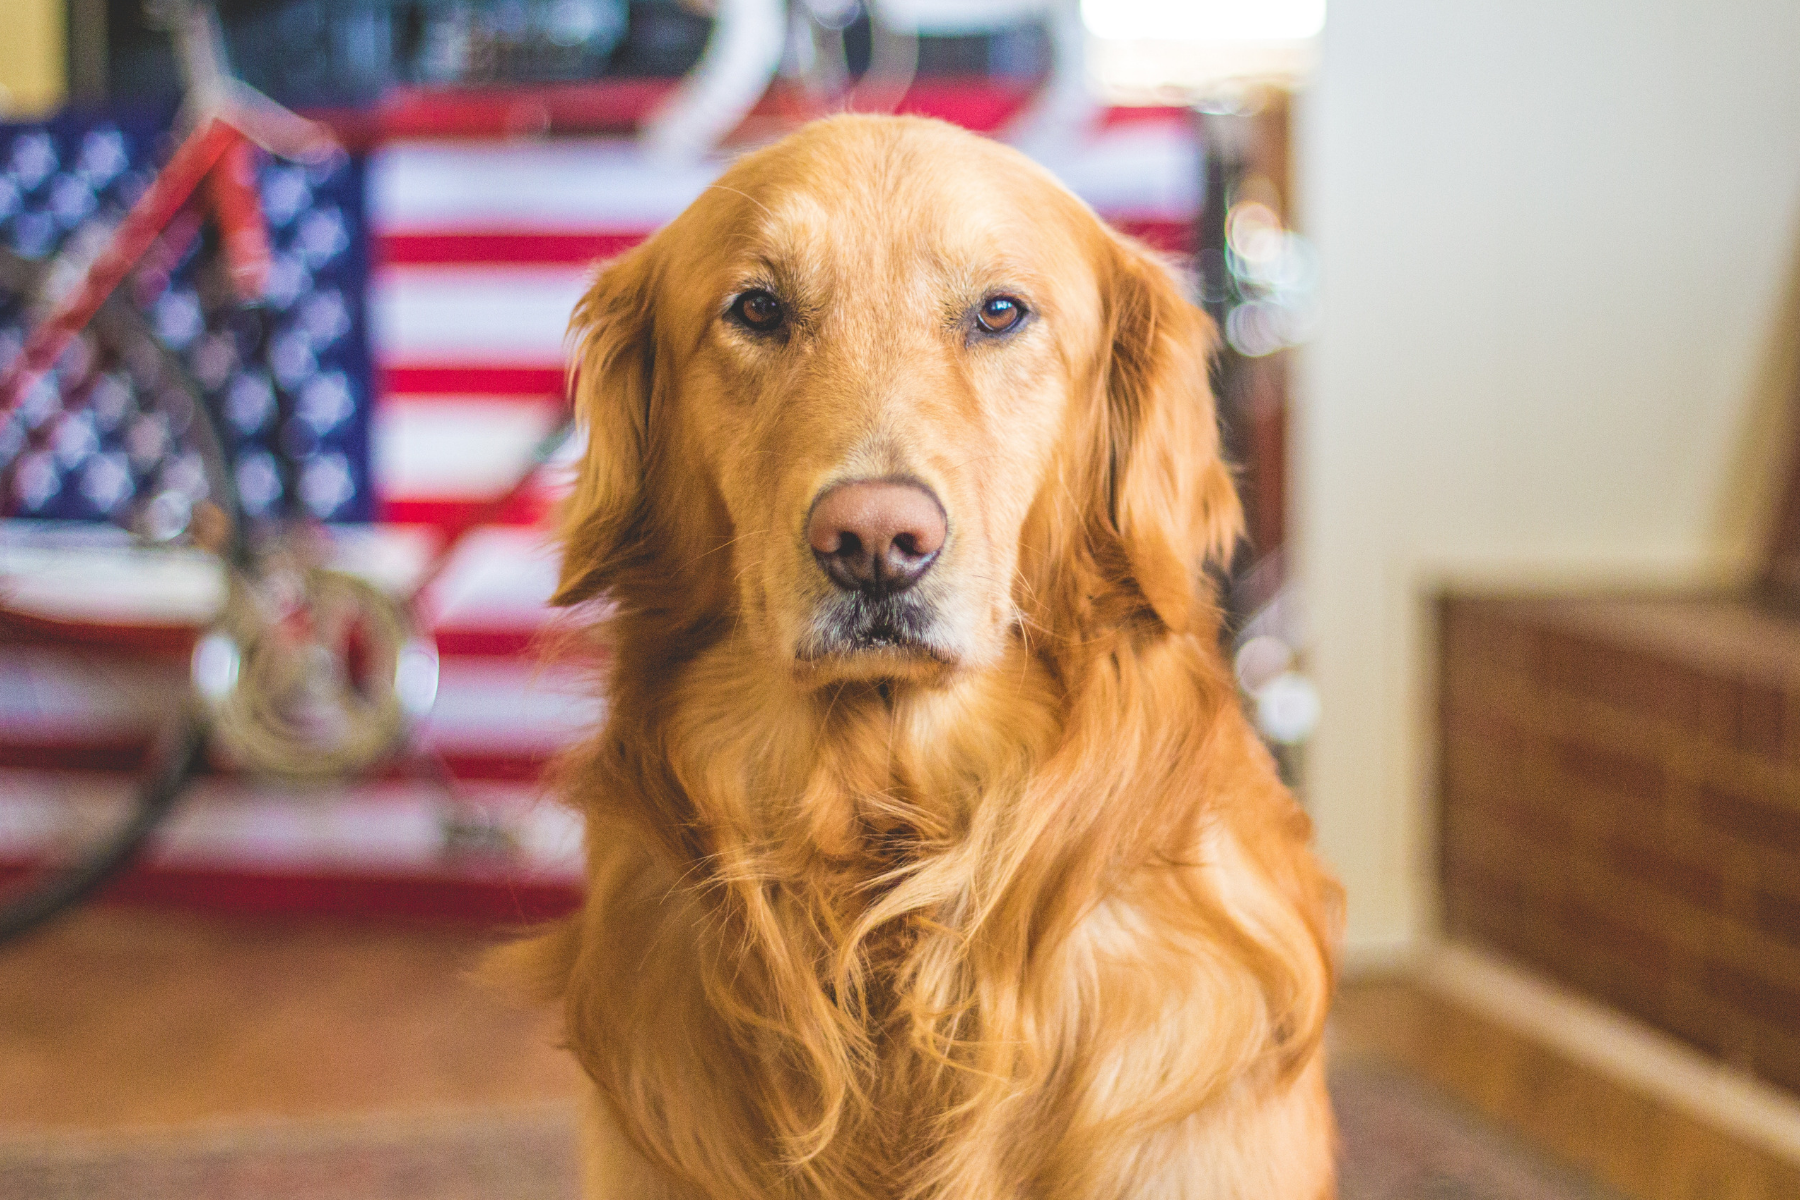 Golden Retrievers: Loving, Beautiful and at Risk for Arthritis